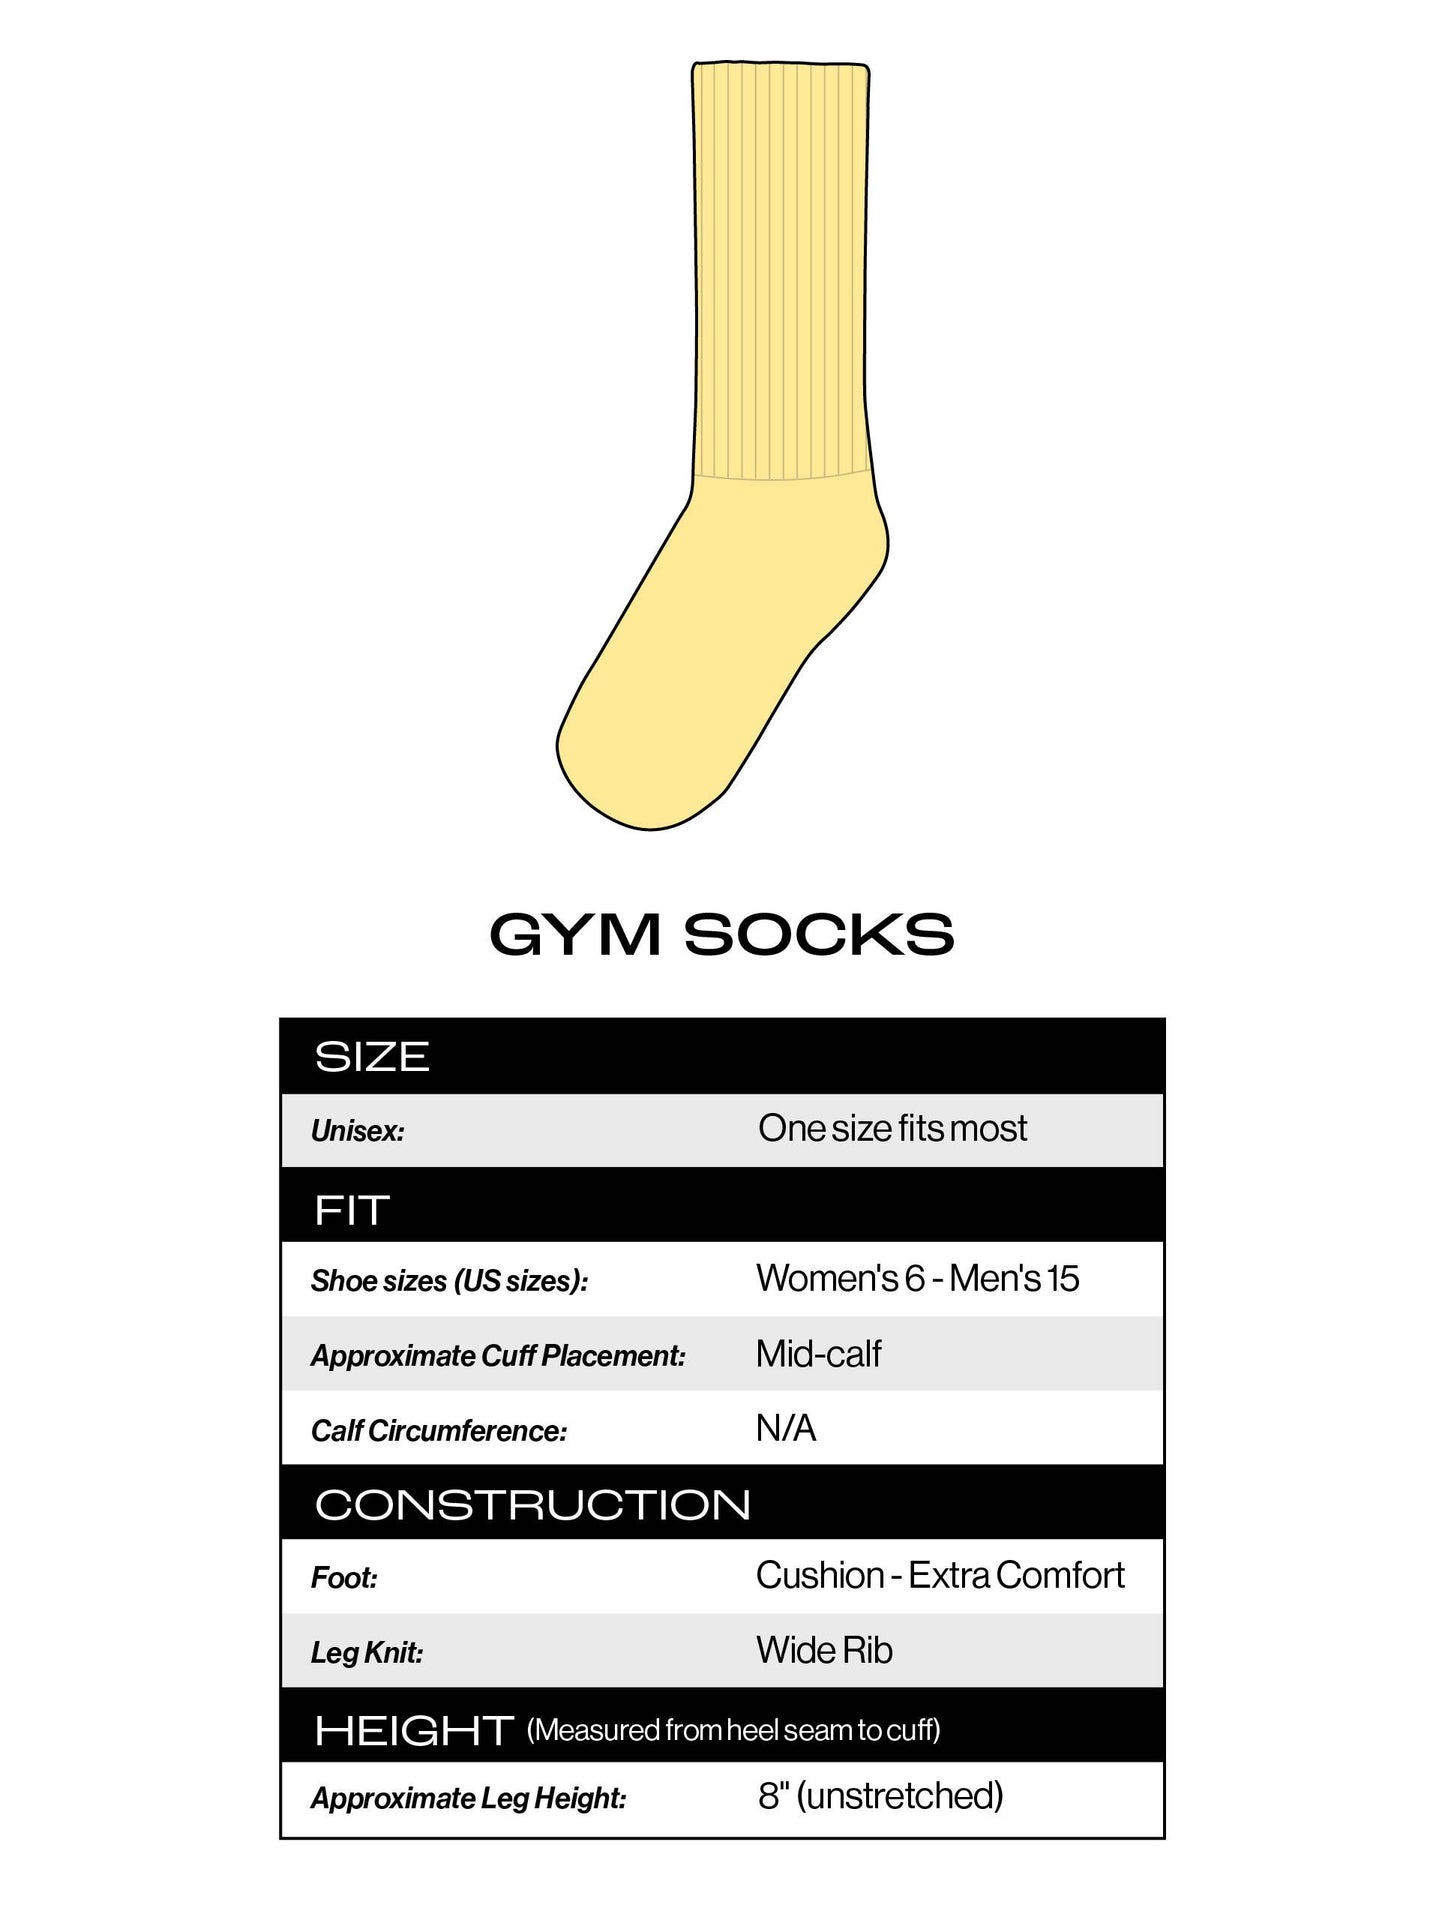 I'm Farting Right Now Gym Crew Socks